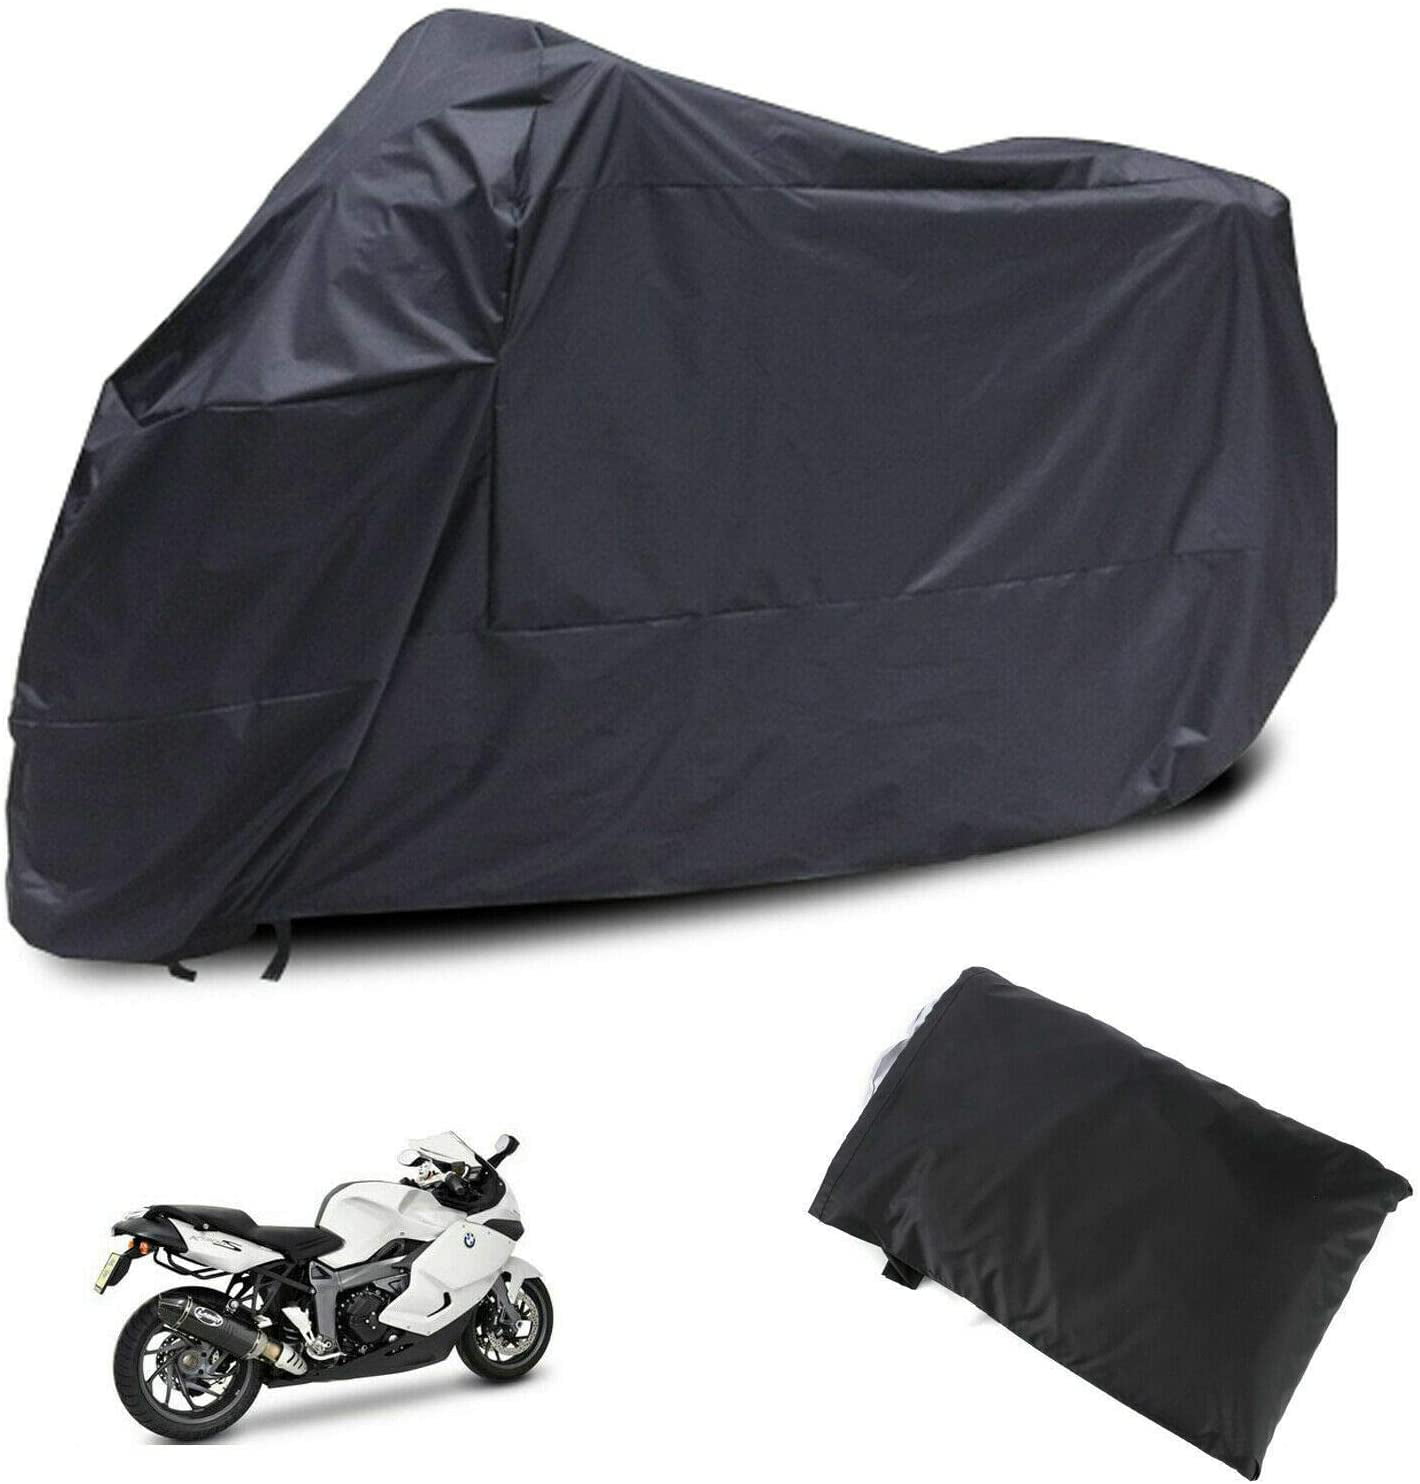 Indoor Outdoor Motorcycle Cover For Chopper Cruiser Bikes XXL Size 245*105*125cm 